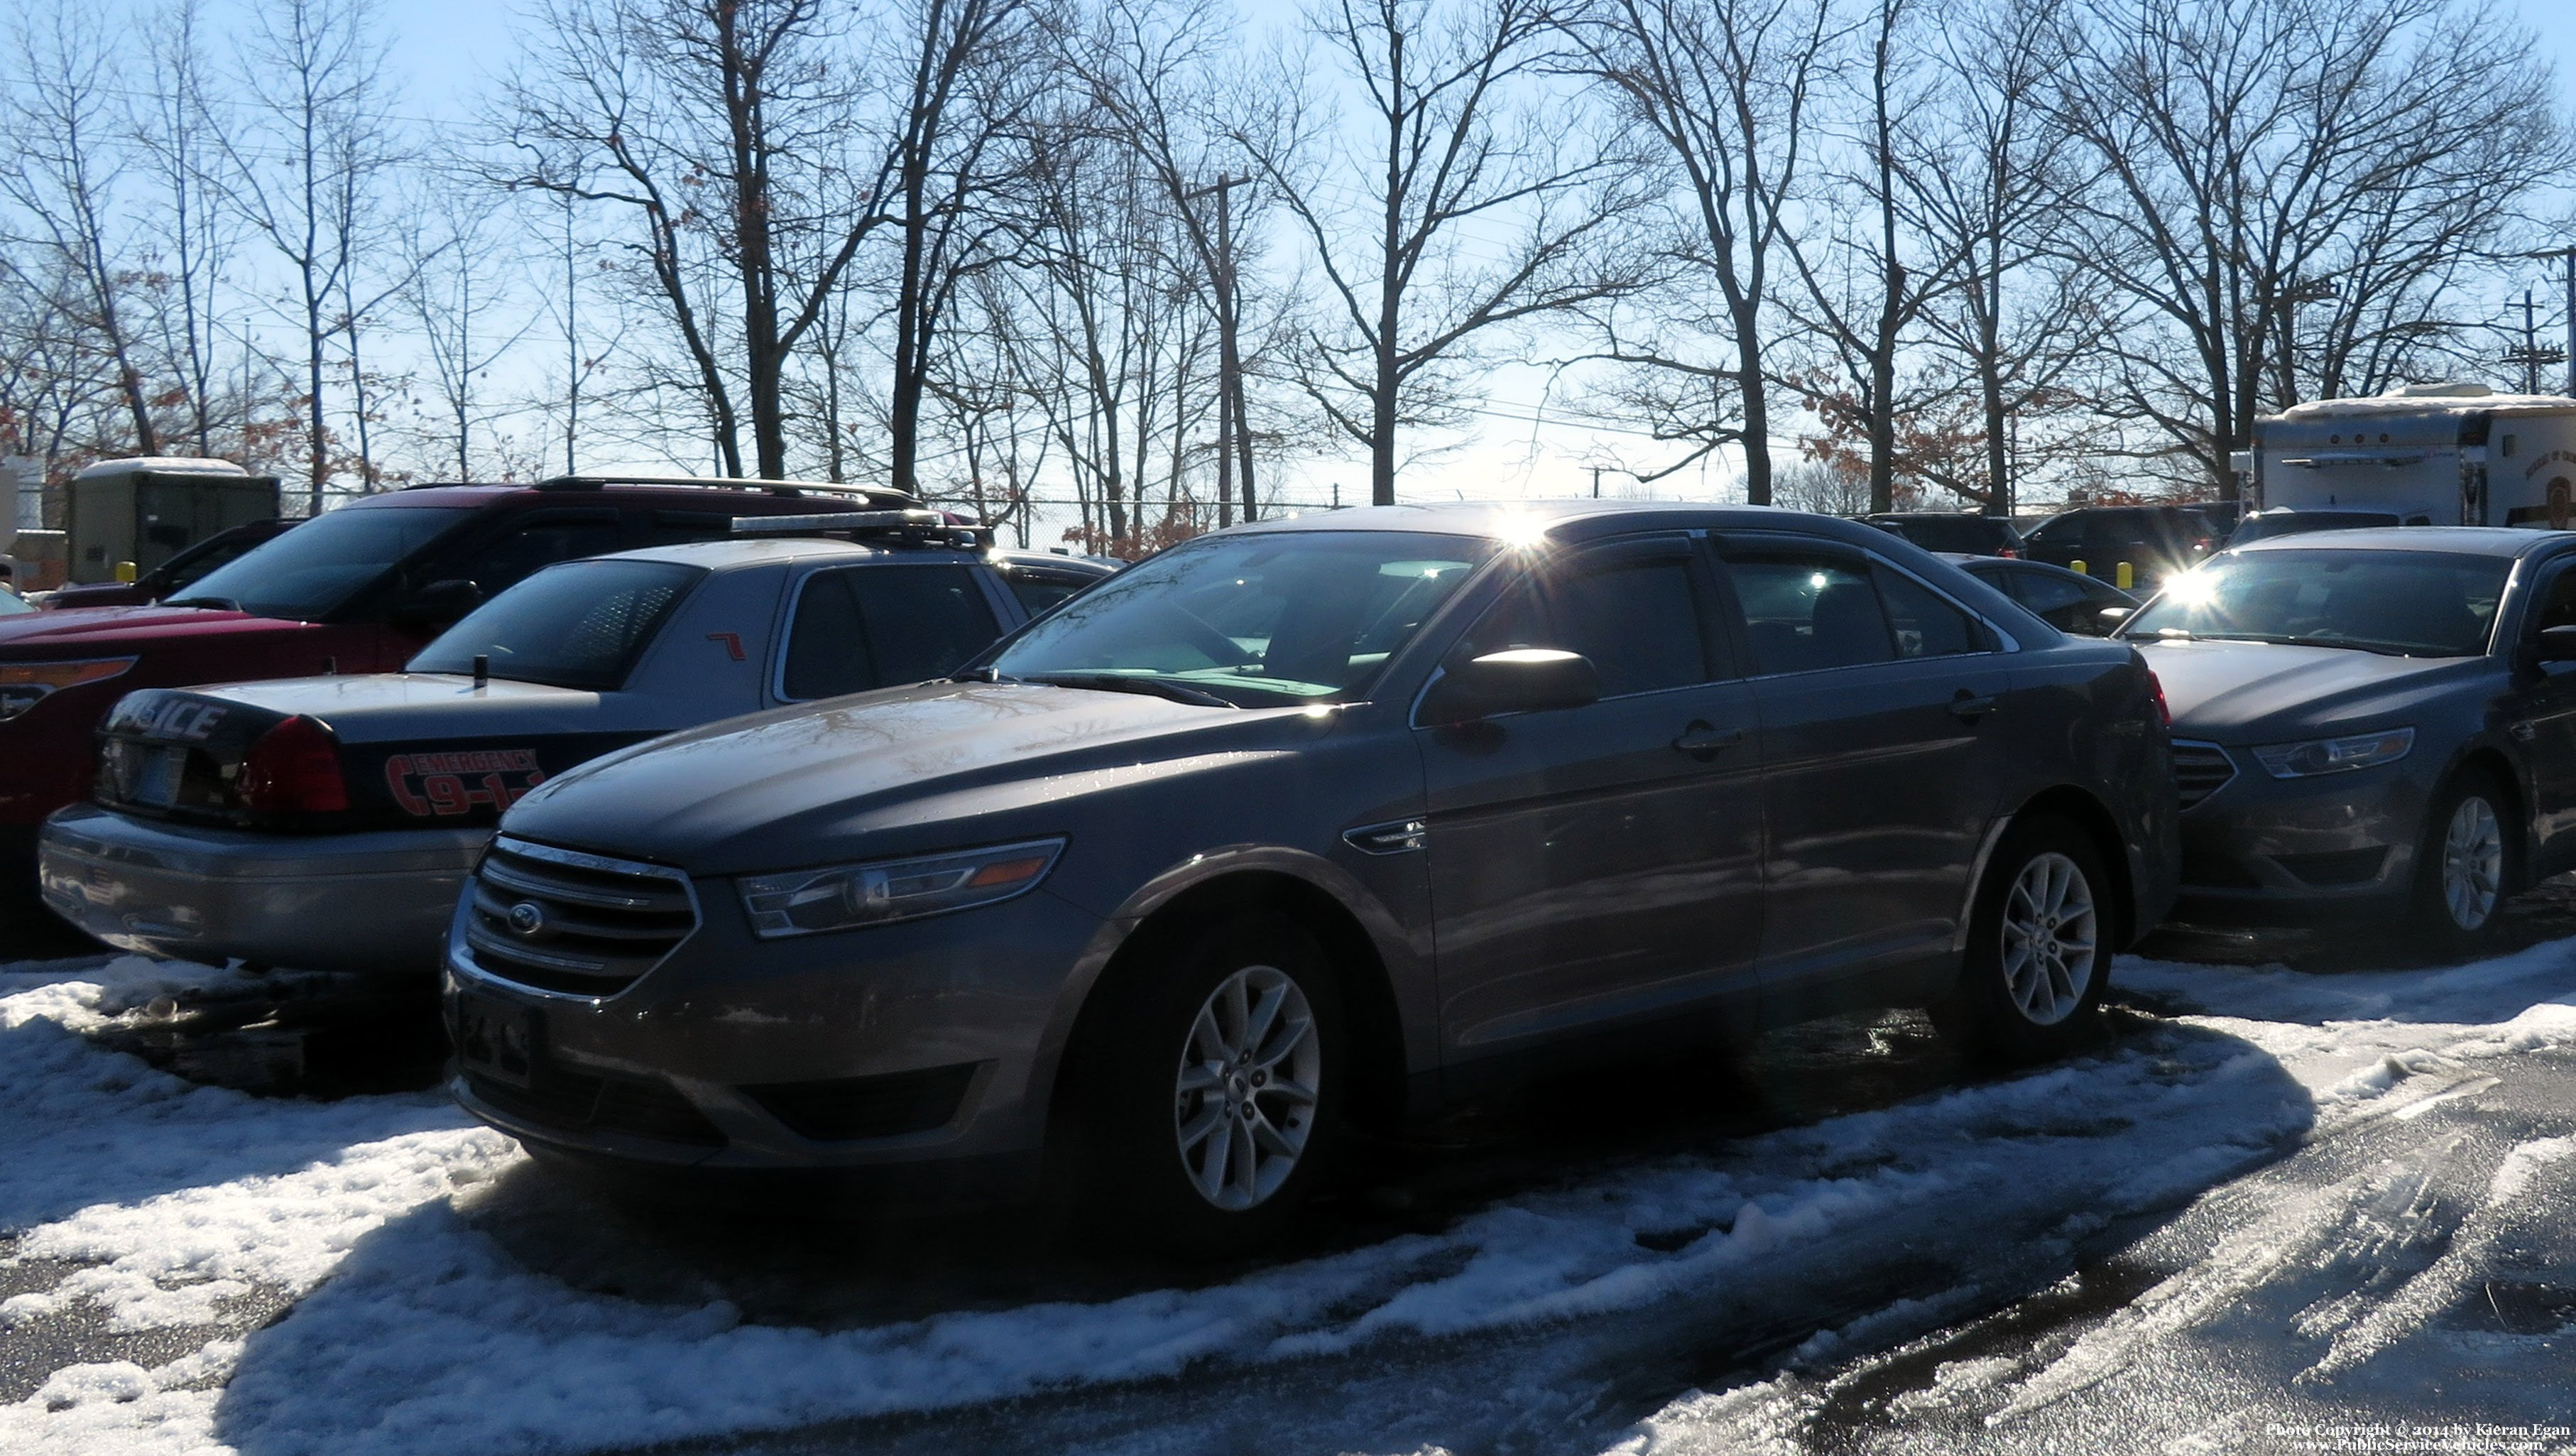 A photo  of East Providence Police
            Detective Unit, a 2013 Ford Taurus             taken by Kieran Egan